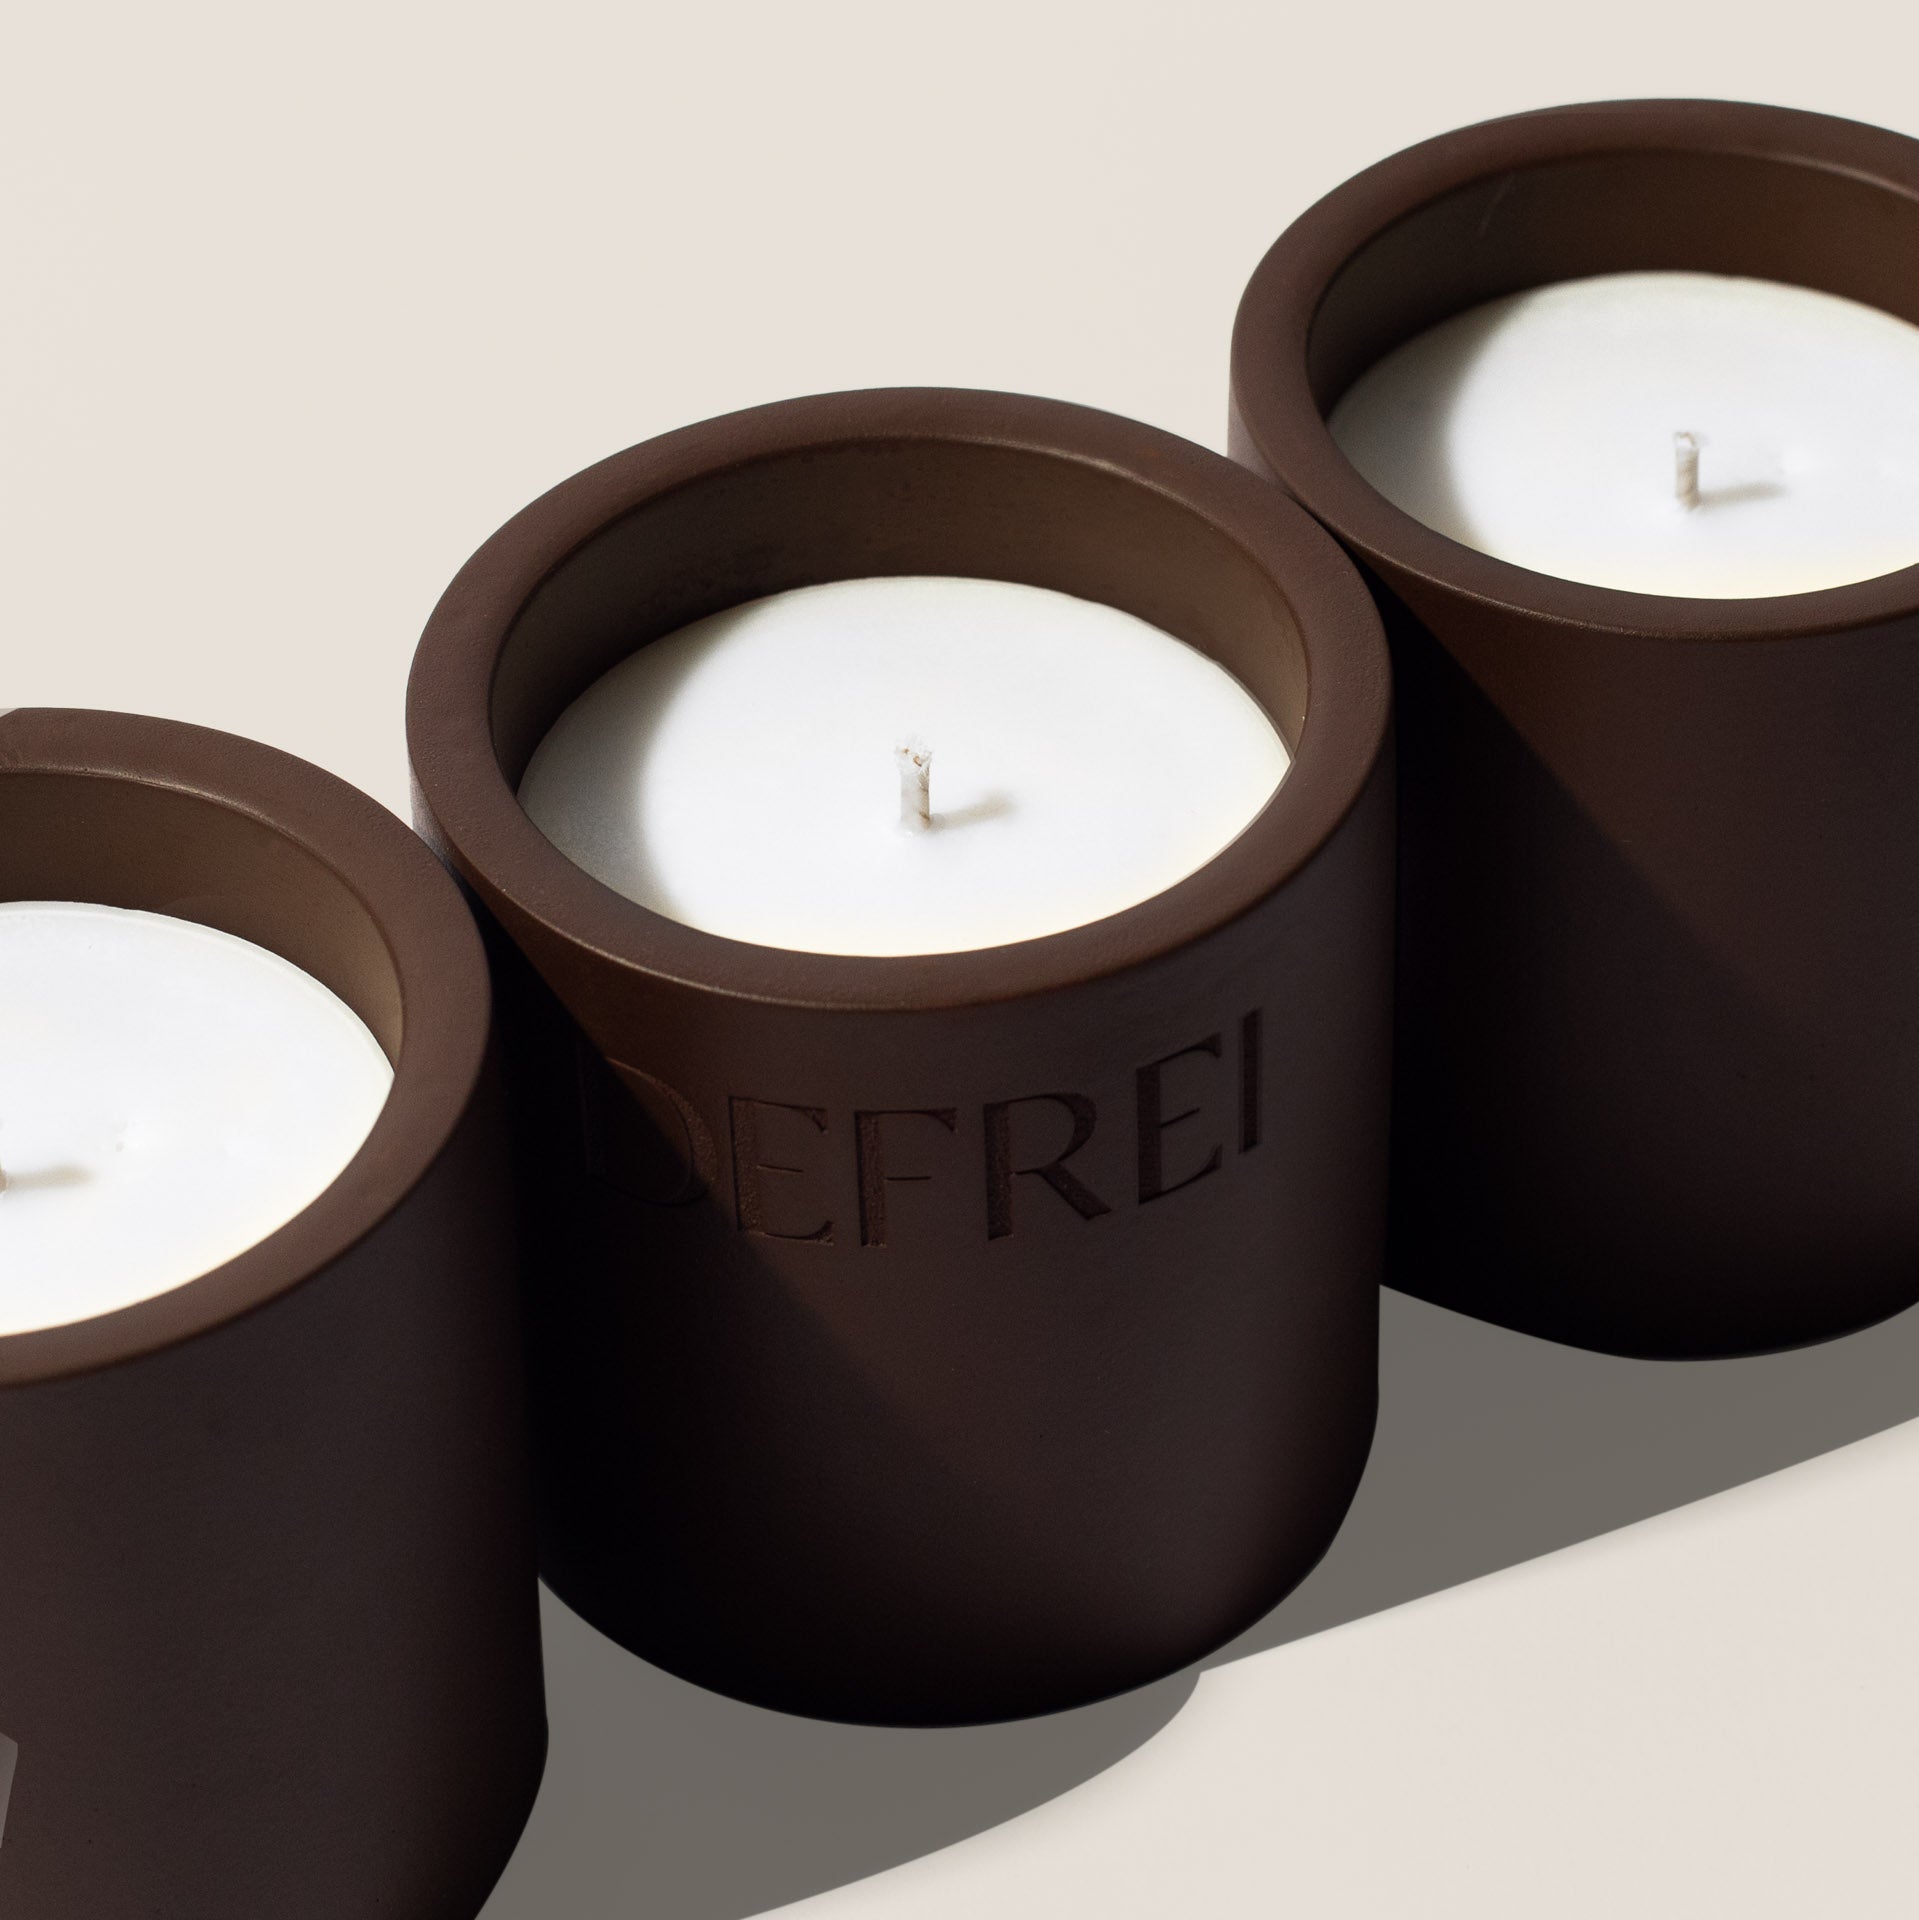 DEFREI LOBBY close up shot of the hand poured luxury scented candle